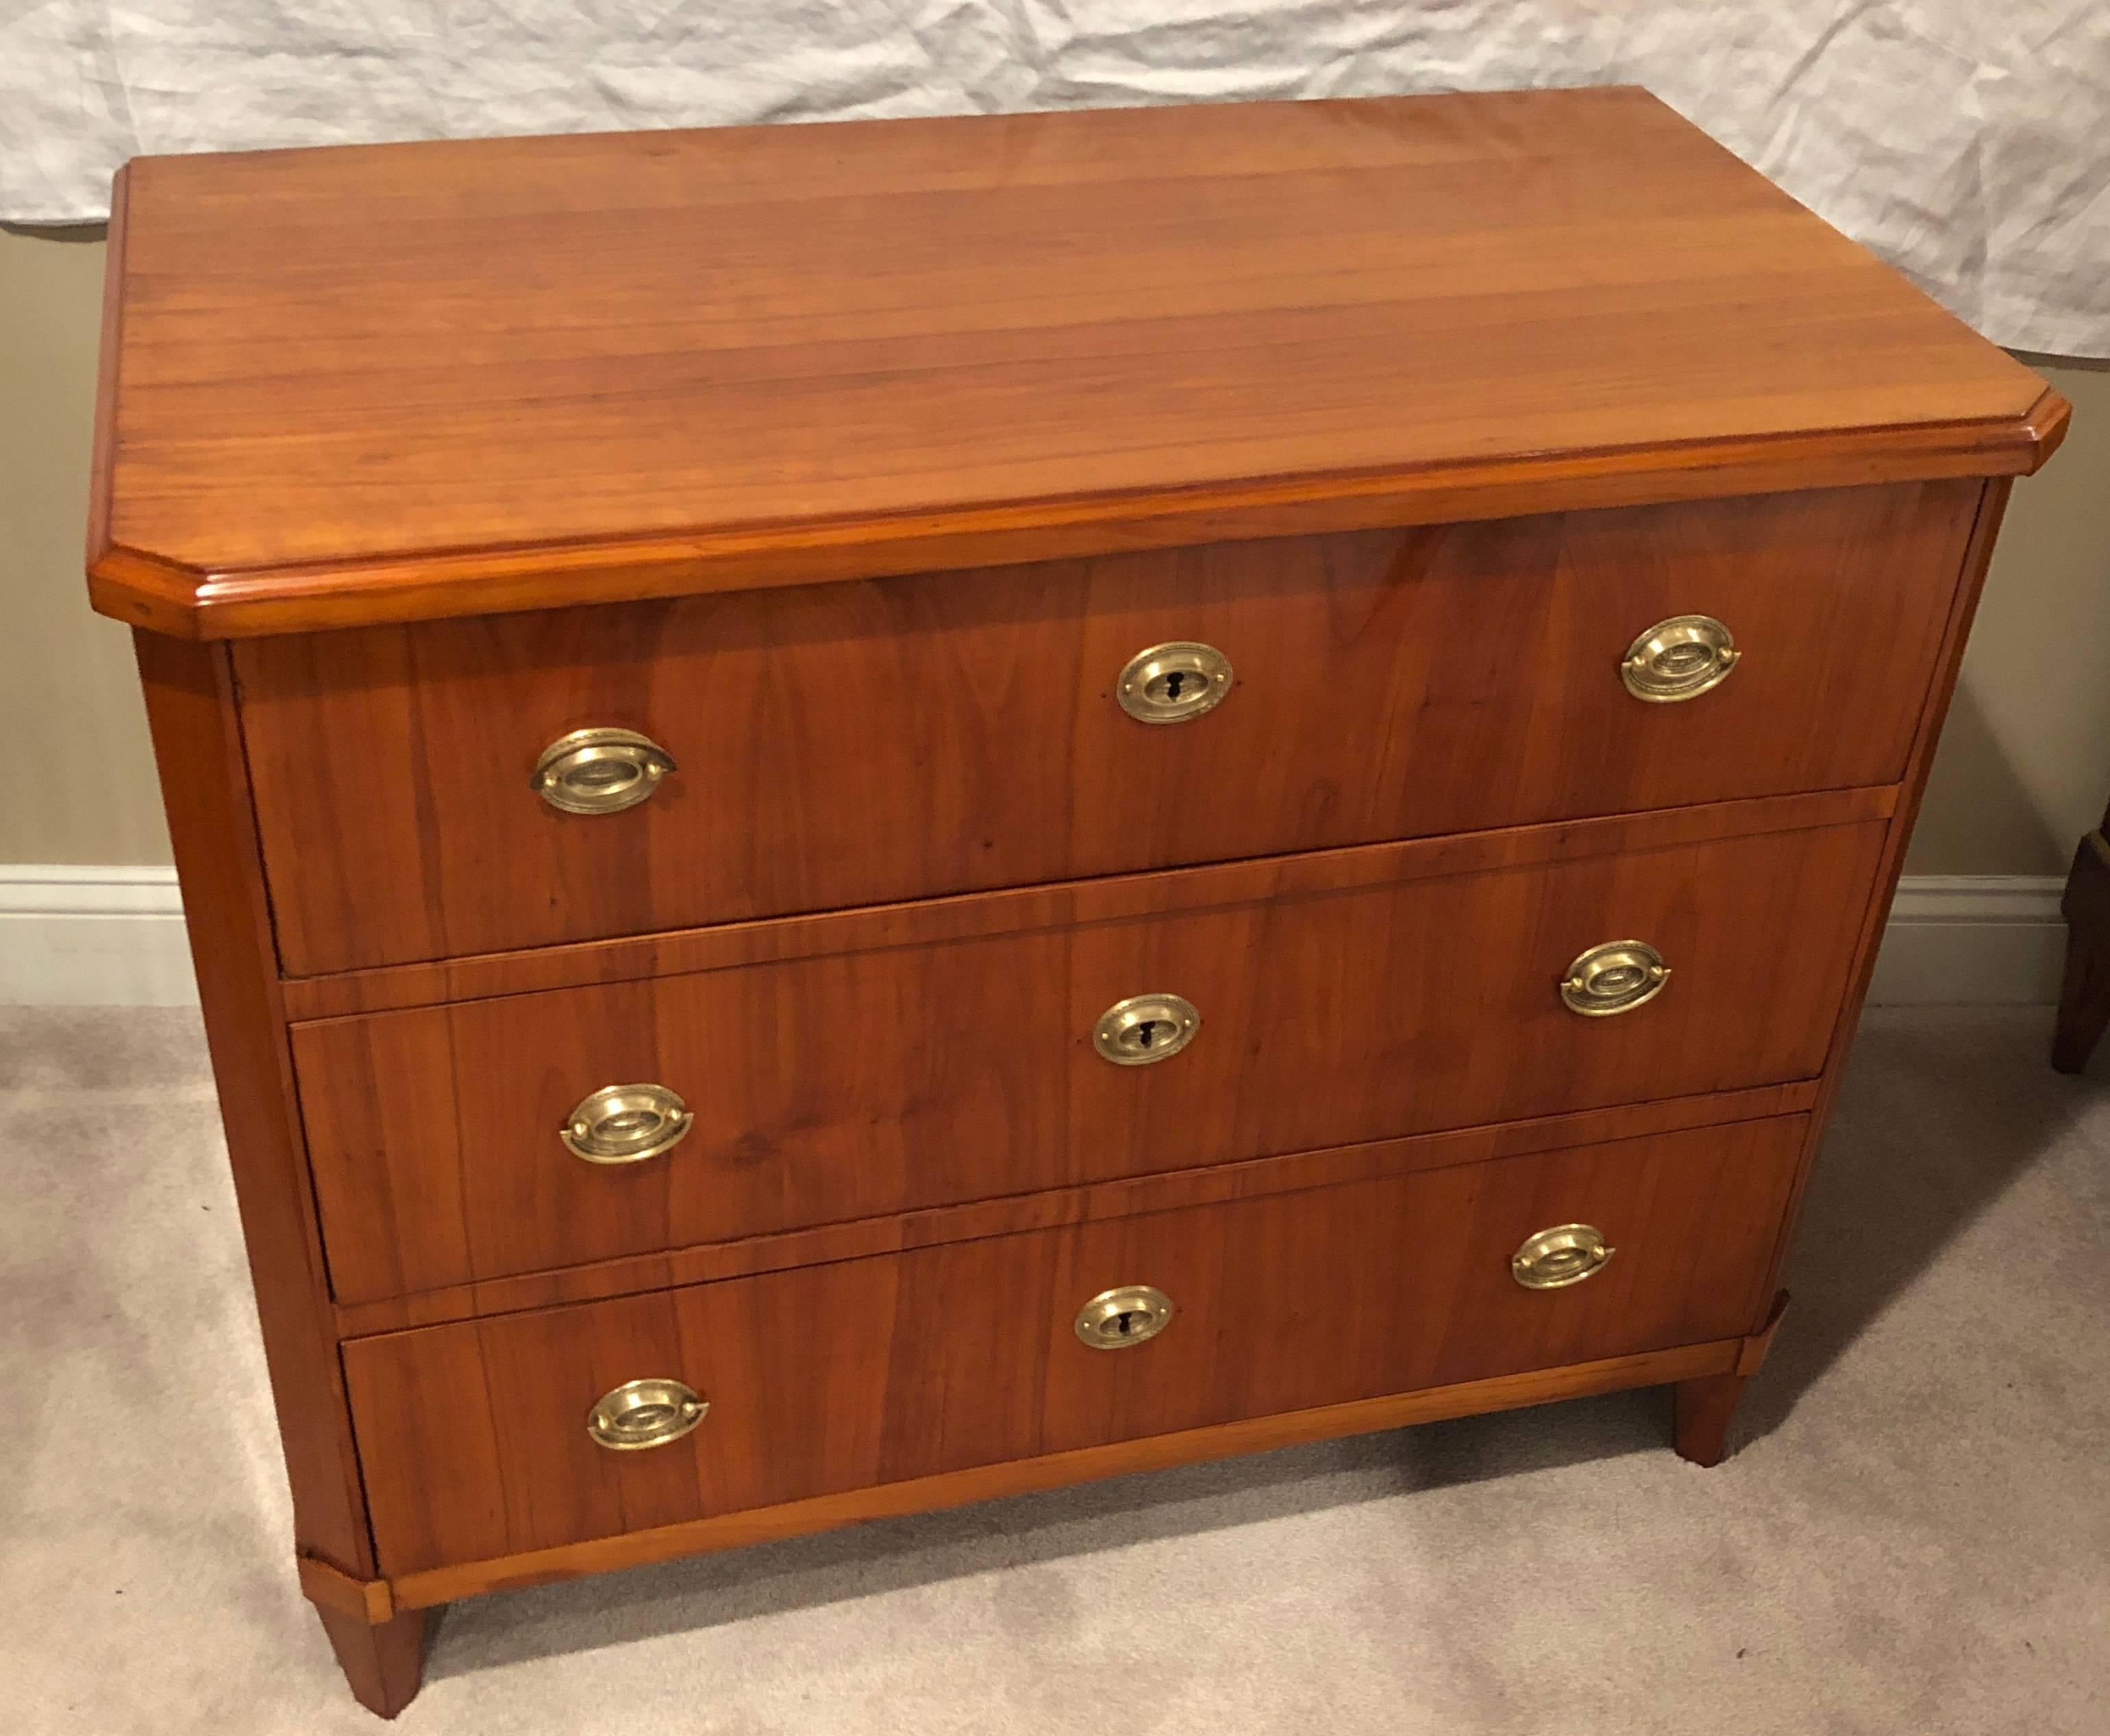 Elegant Biedermeier commode, South German, 1820, cherry veneer. The commode is in excellent condition, it has been professionally restored.